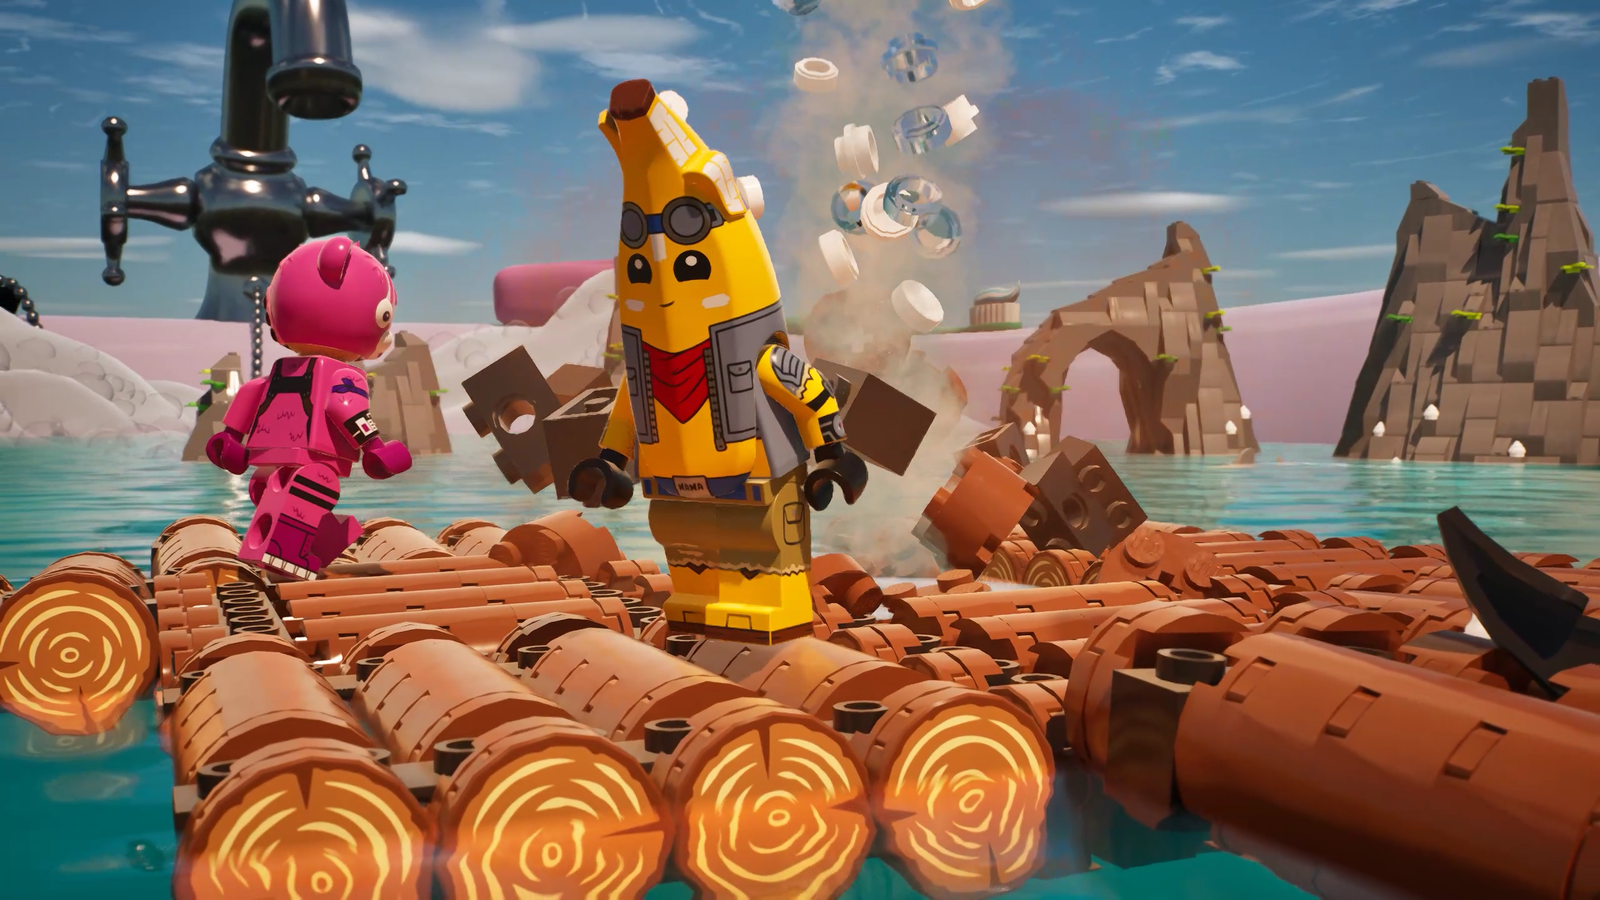 For a cute and cheery little survival game, Lego Fortnite goes pretty hard